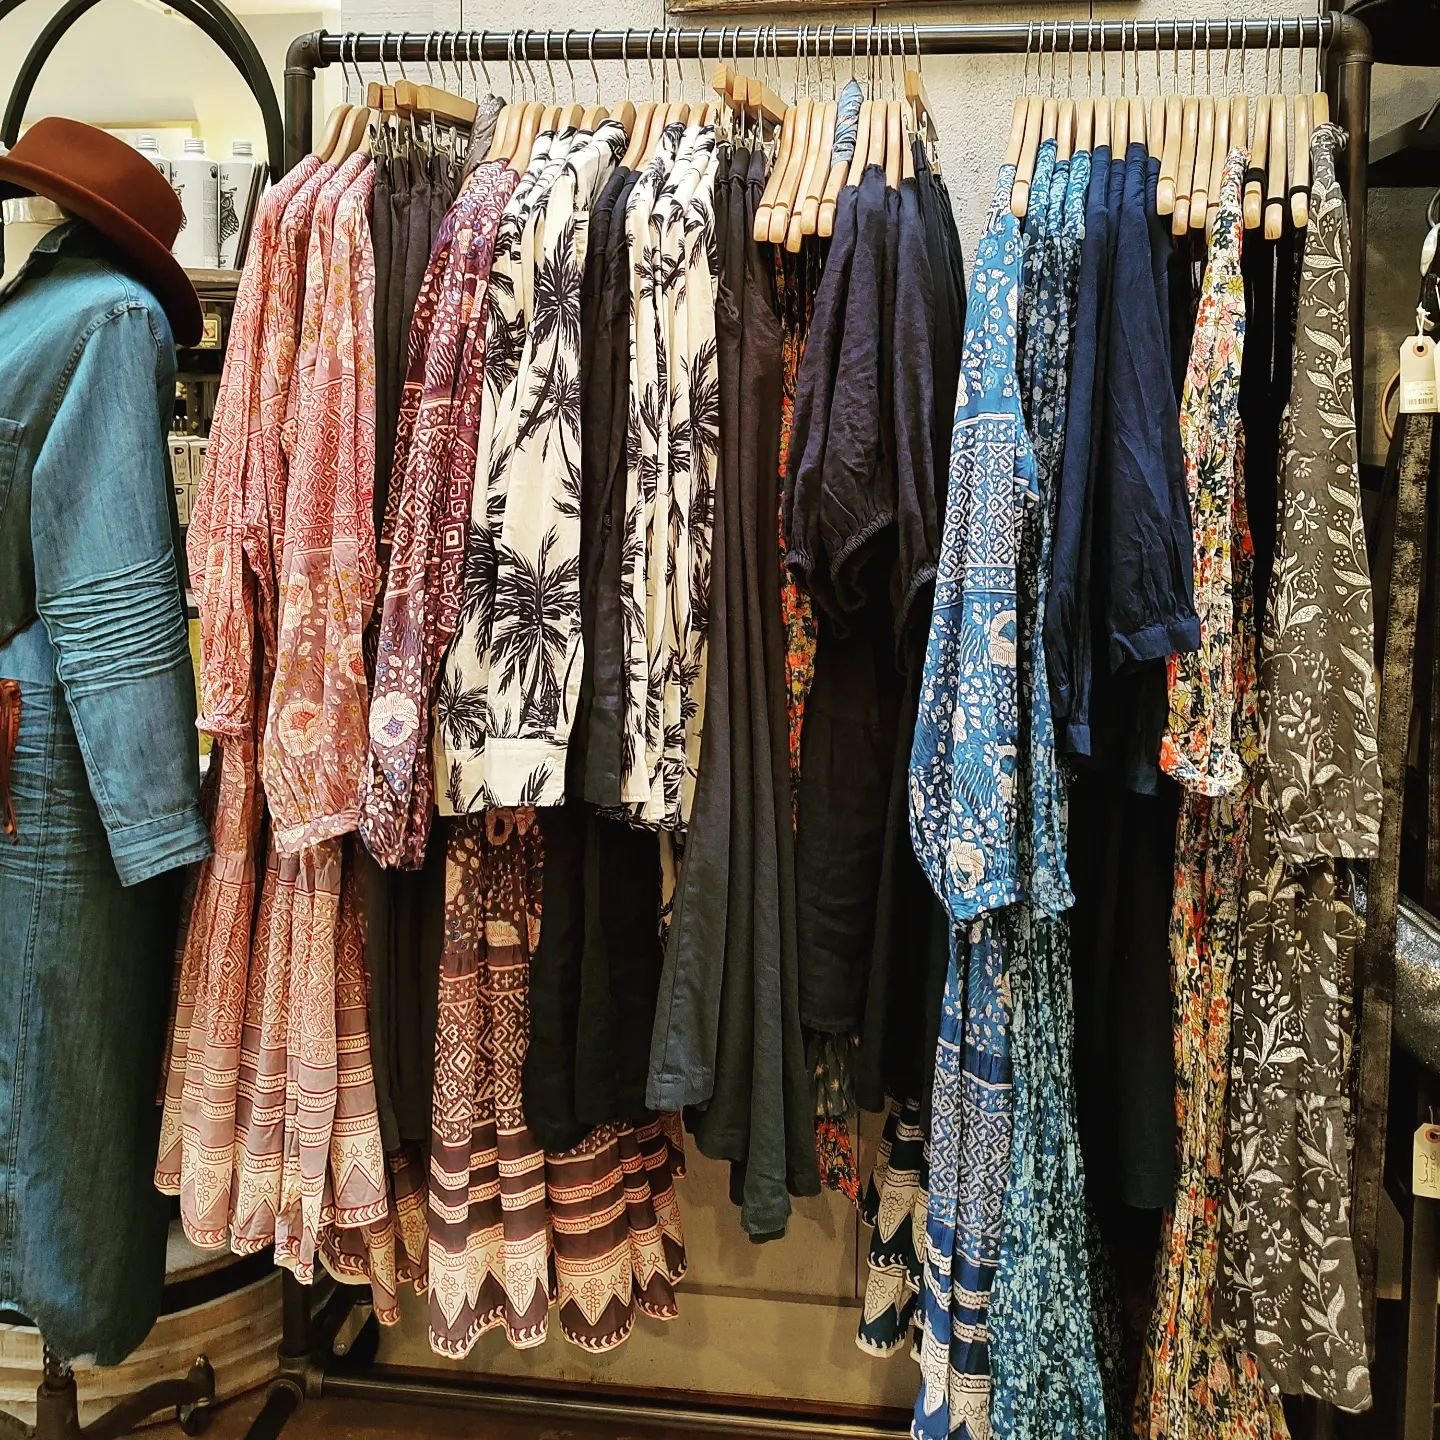 Summer dresses, long and short, are here.  Light and airy these are flattering on anyone.  #frenchgoods #artisanal #summer #bohemian #handblocked #38years #newprestonct #washingtonbusinessassociation